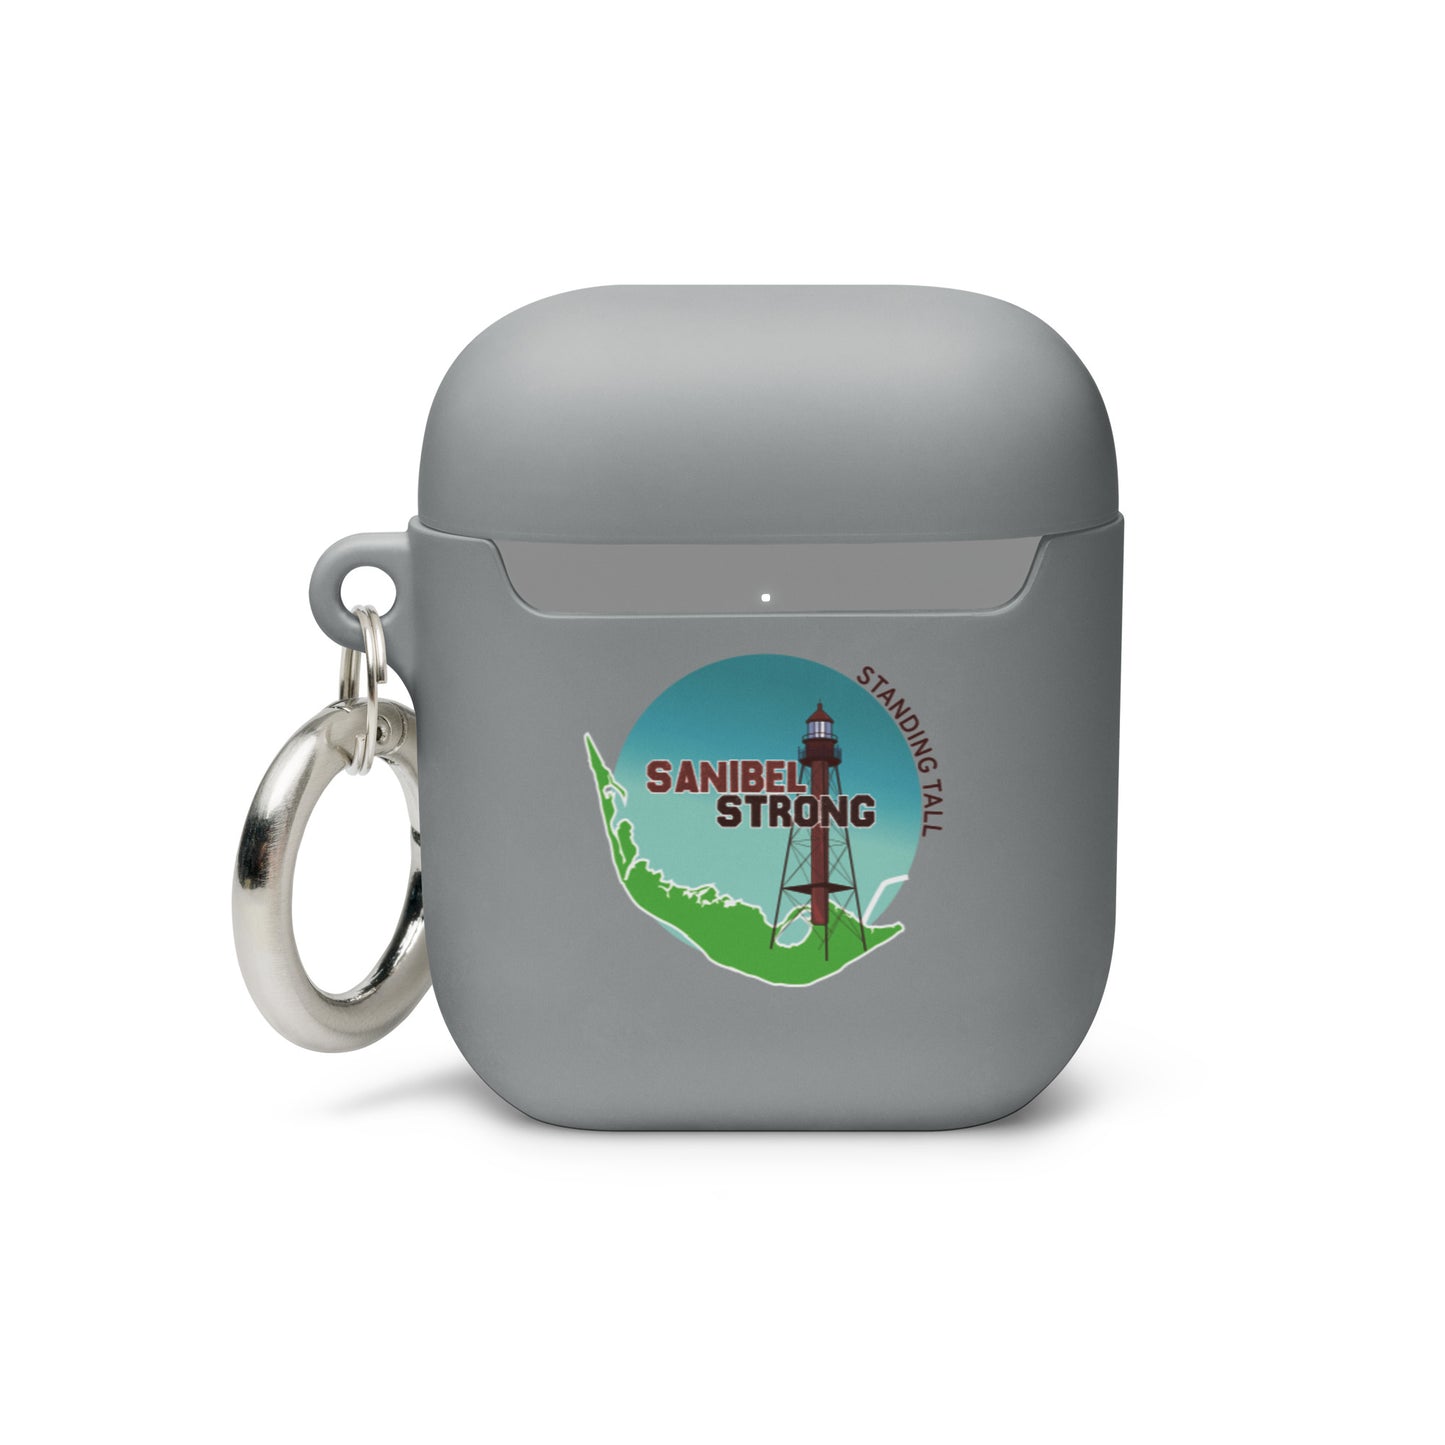 Sanibel Strong Standing Tall AirPods case